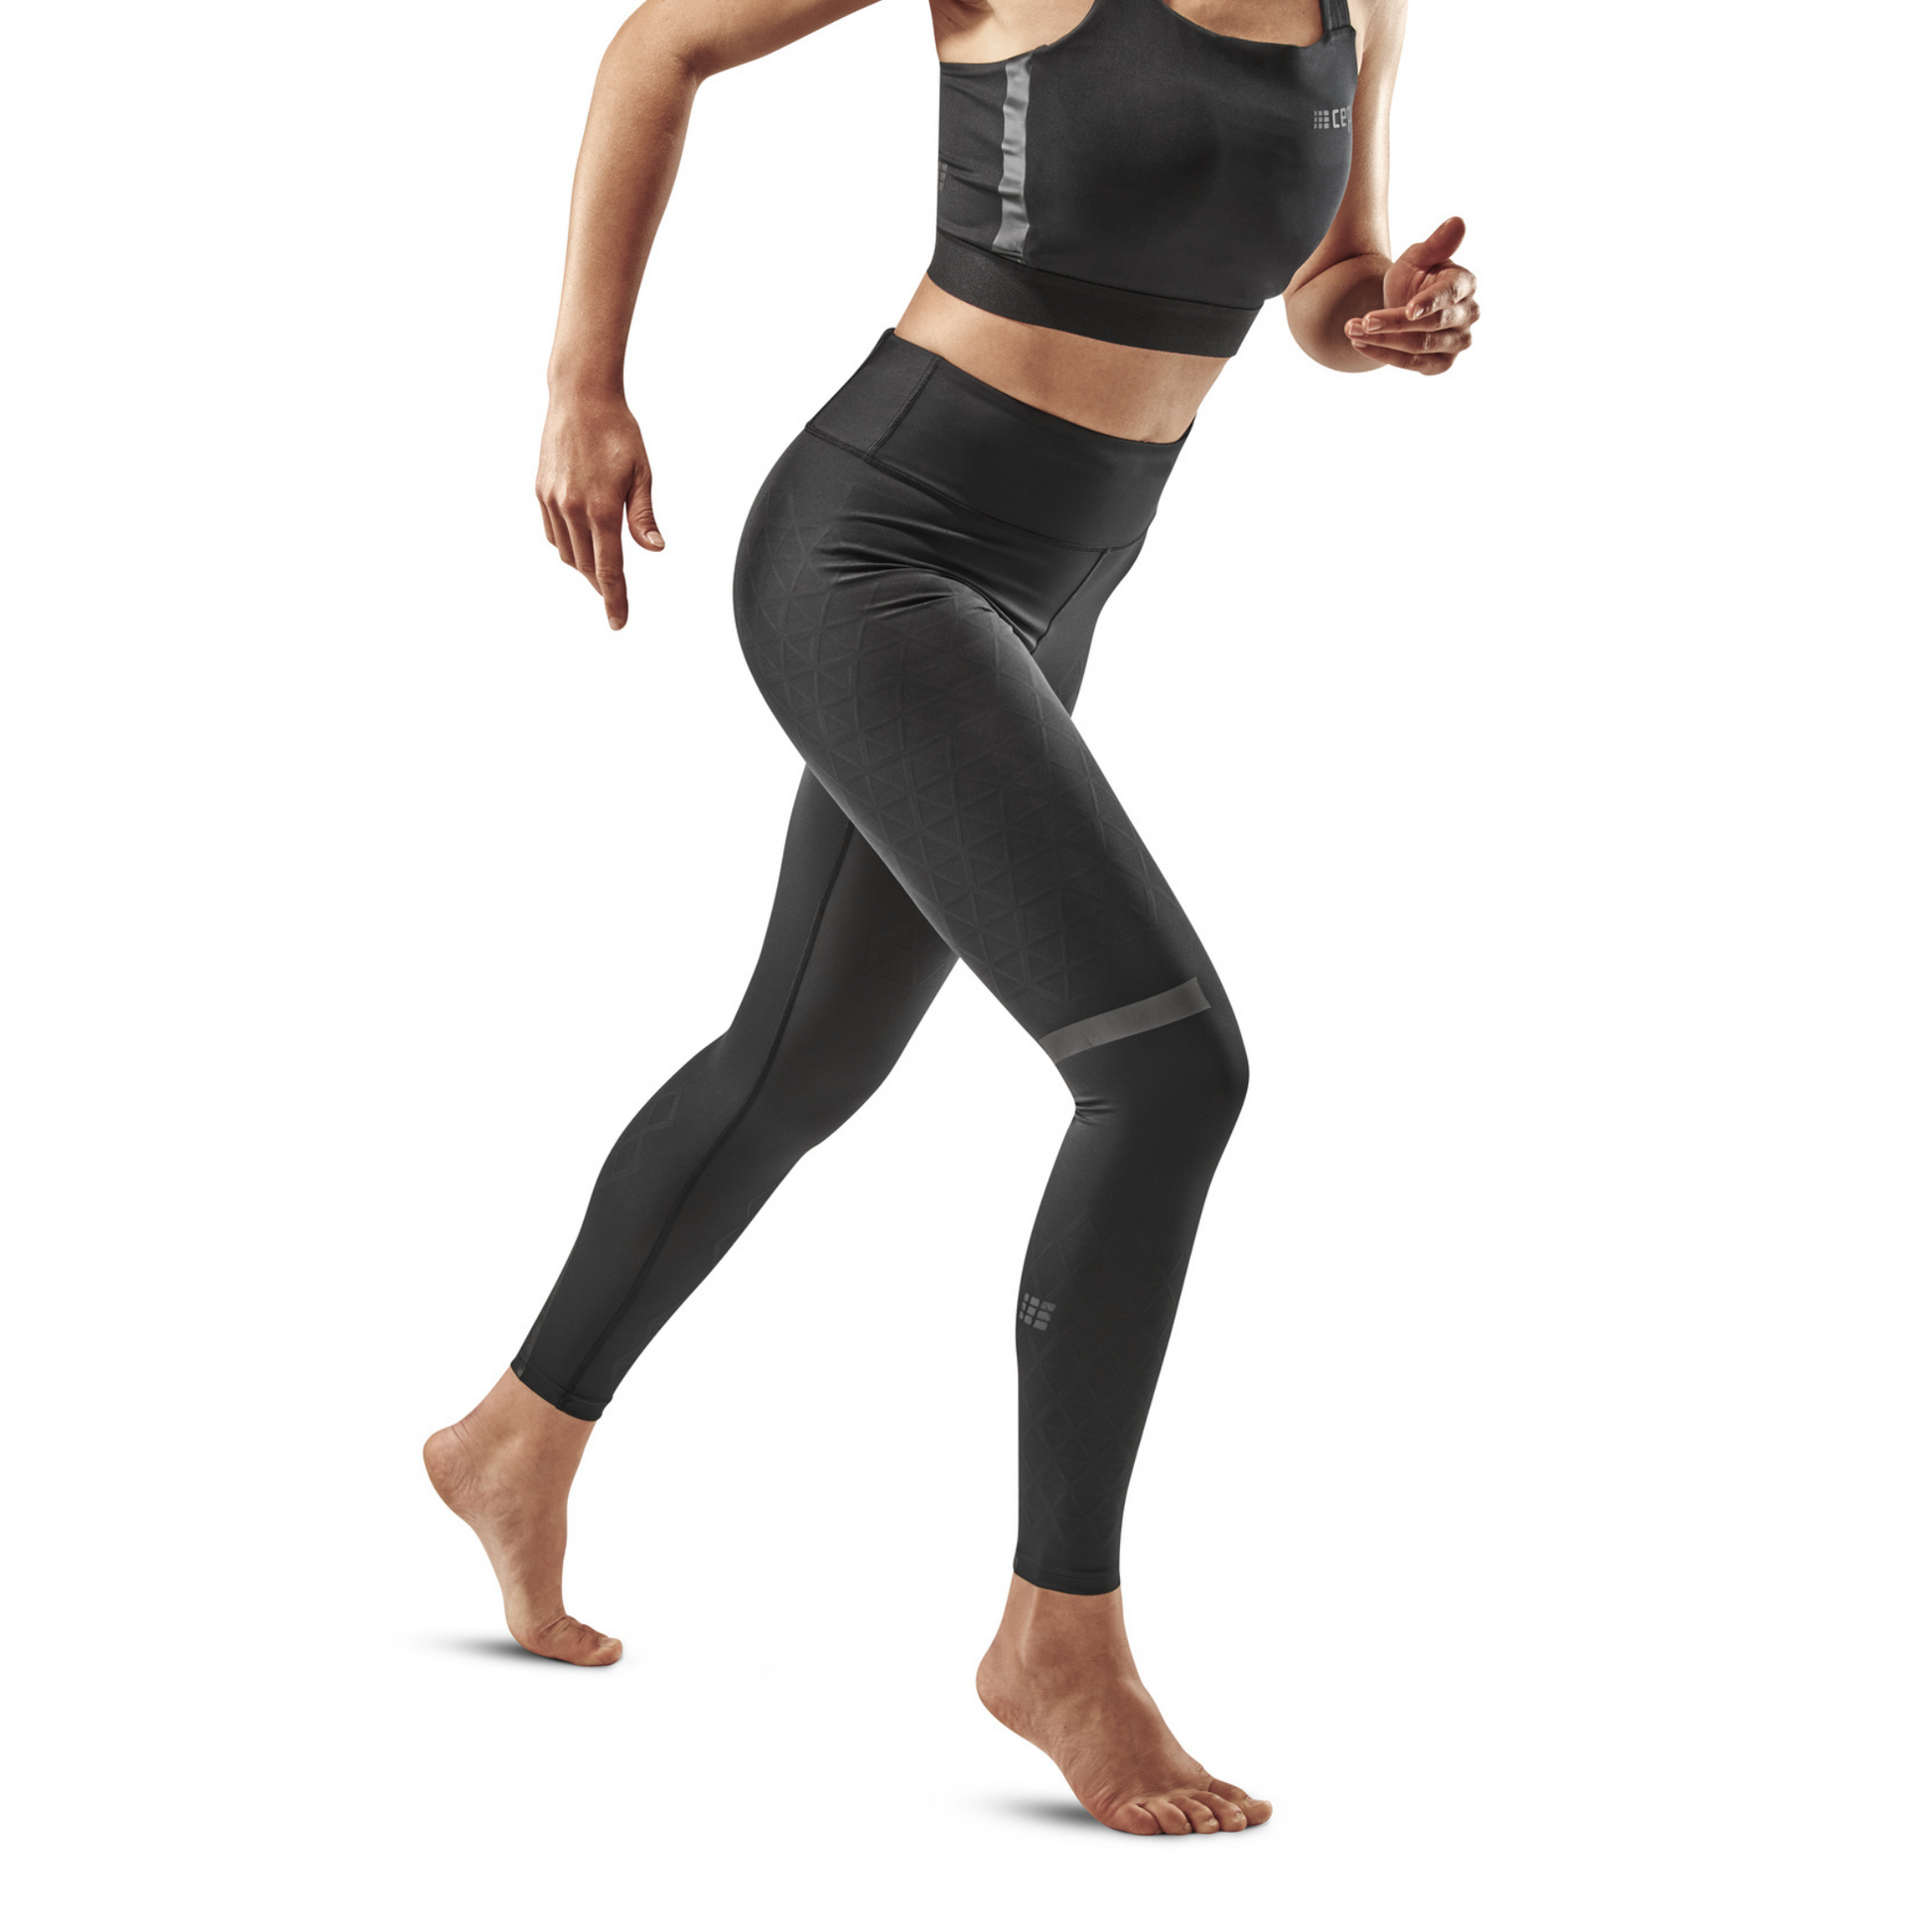 The Run Support Tights, Women, Black